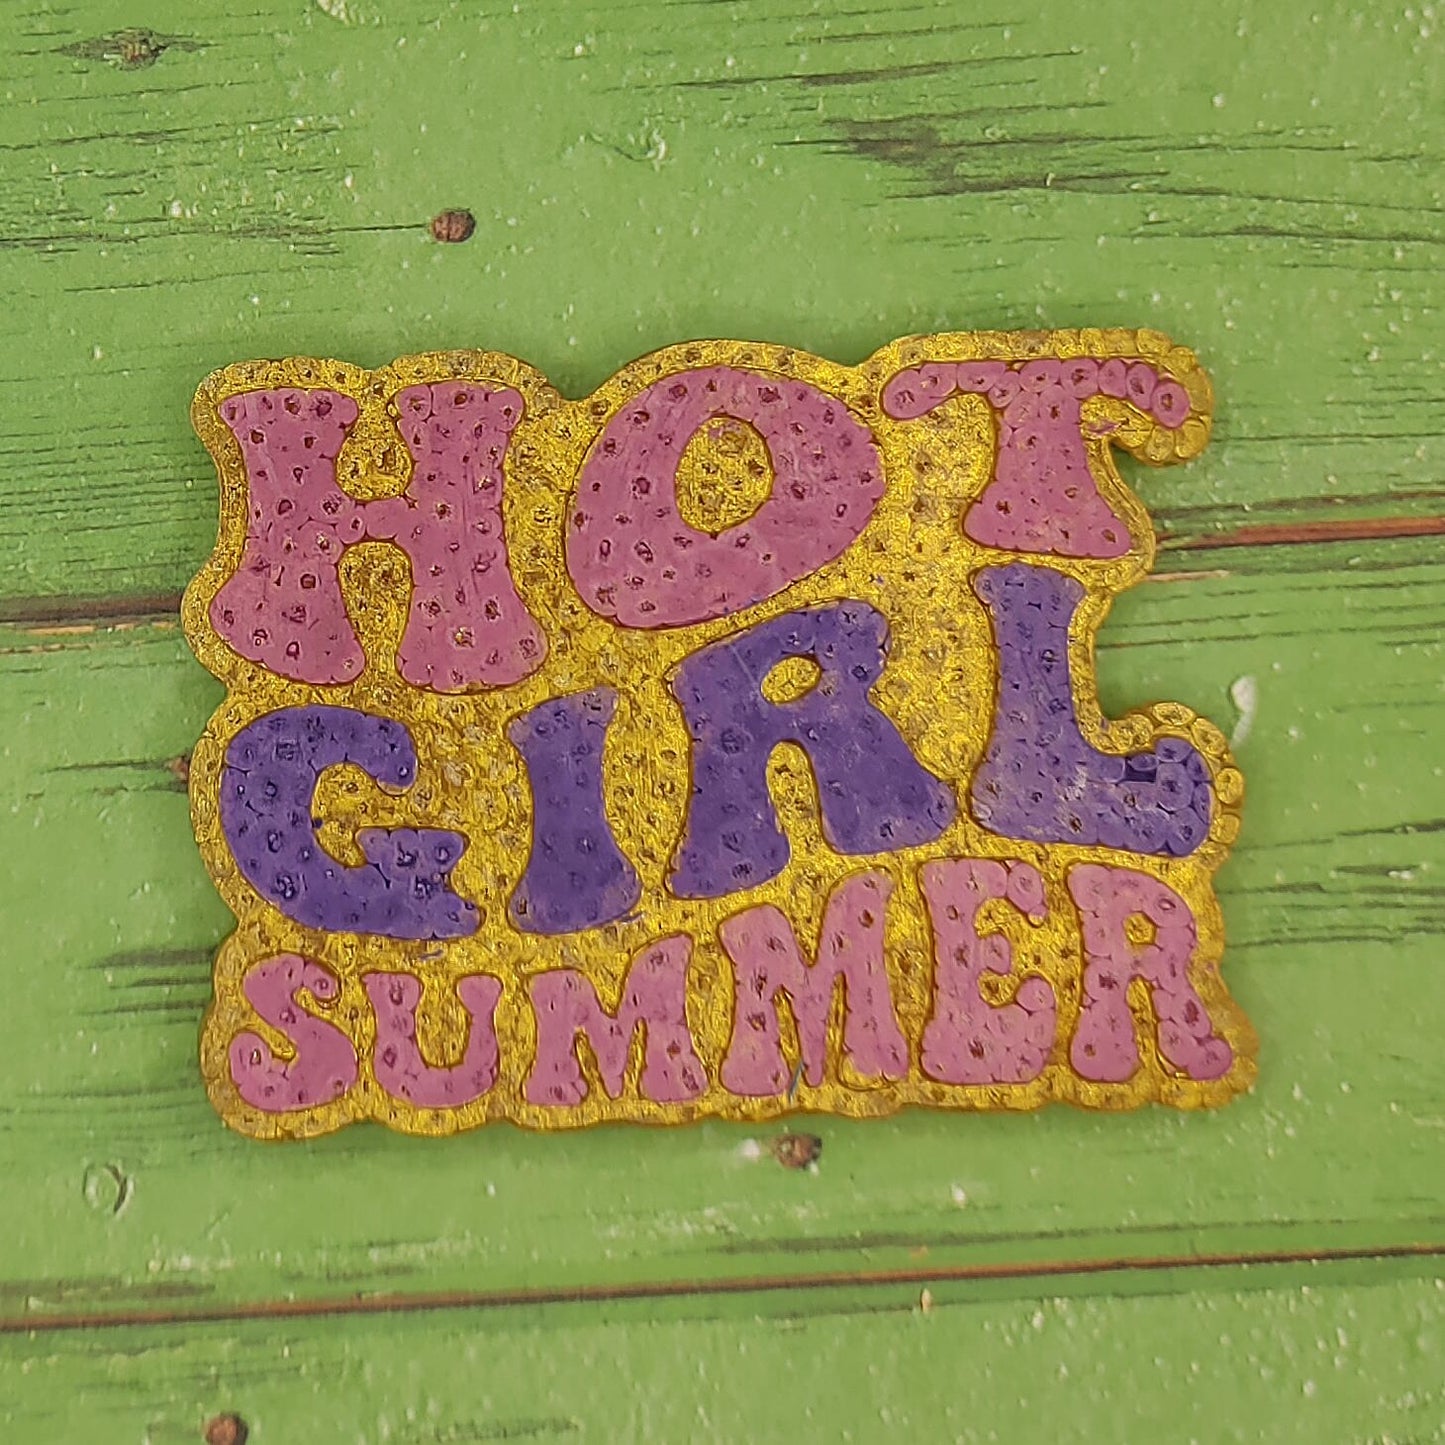 Hot Girl Summer - Silicone Freshie Mold